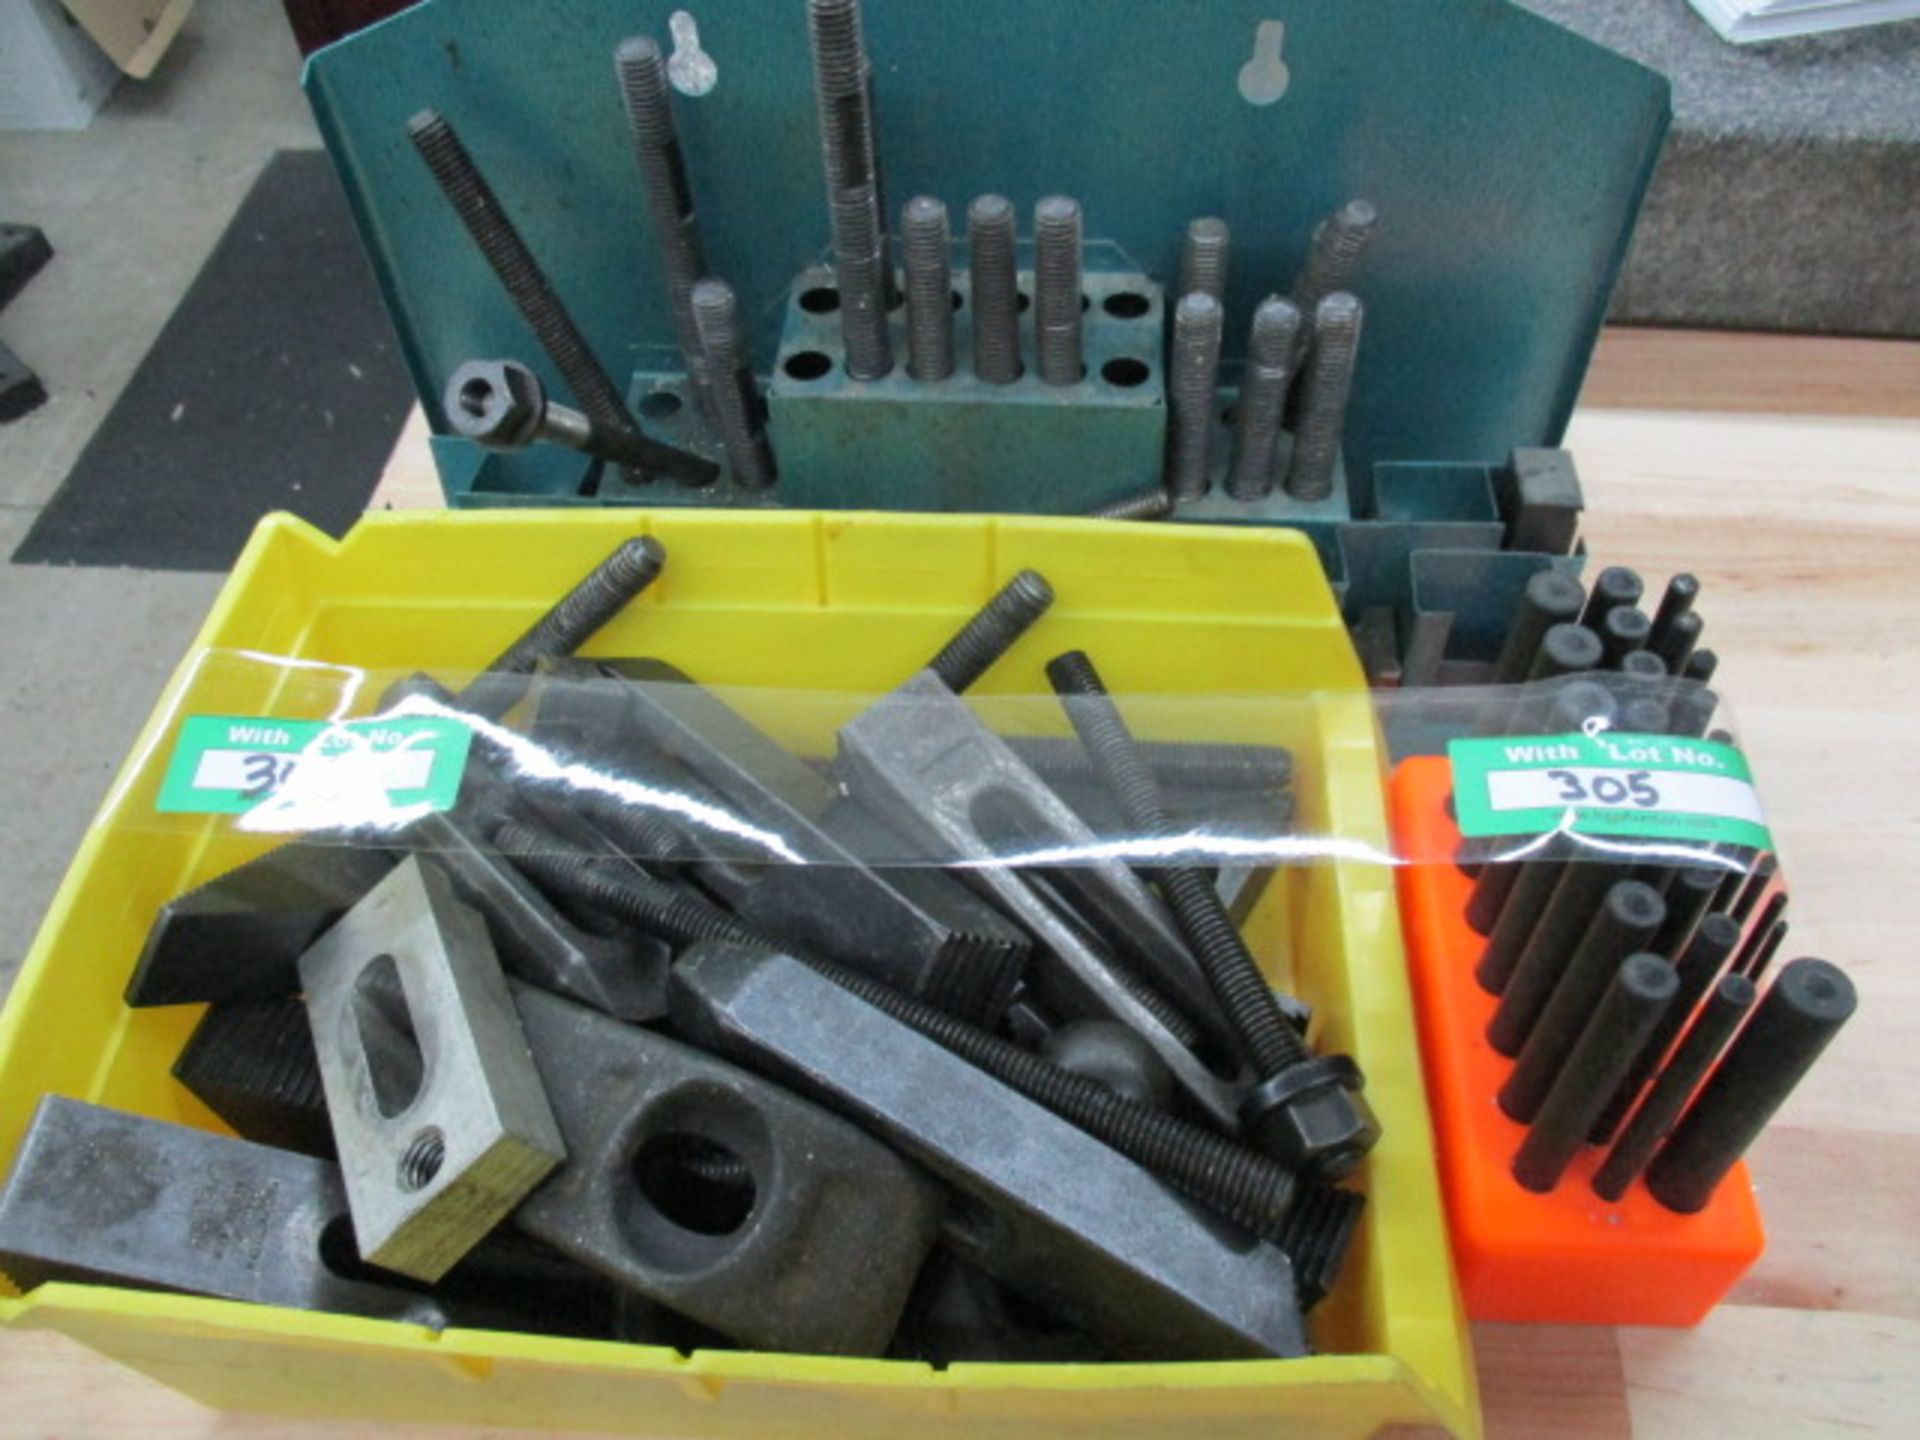 Step Block & Clamp Set And Transfer Punch Set. LOC: Area-22. Asset Located At Clarity Medical